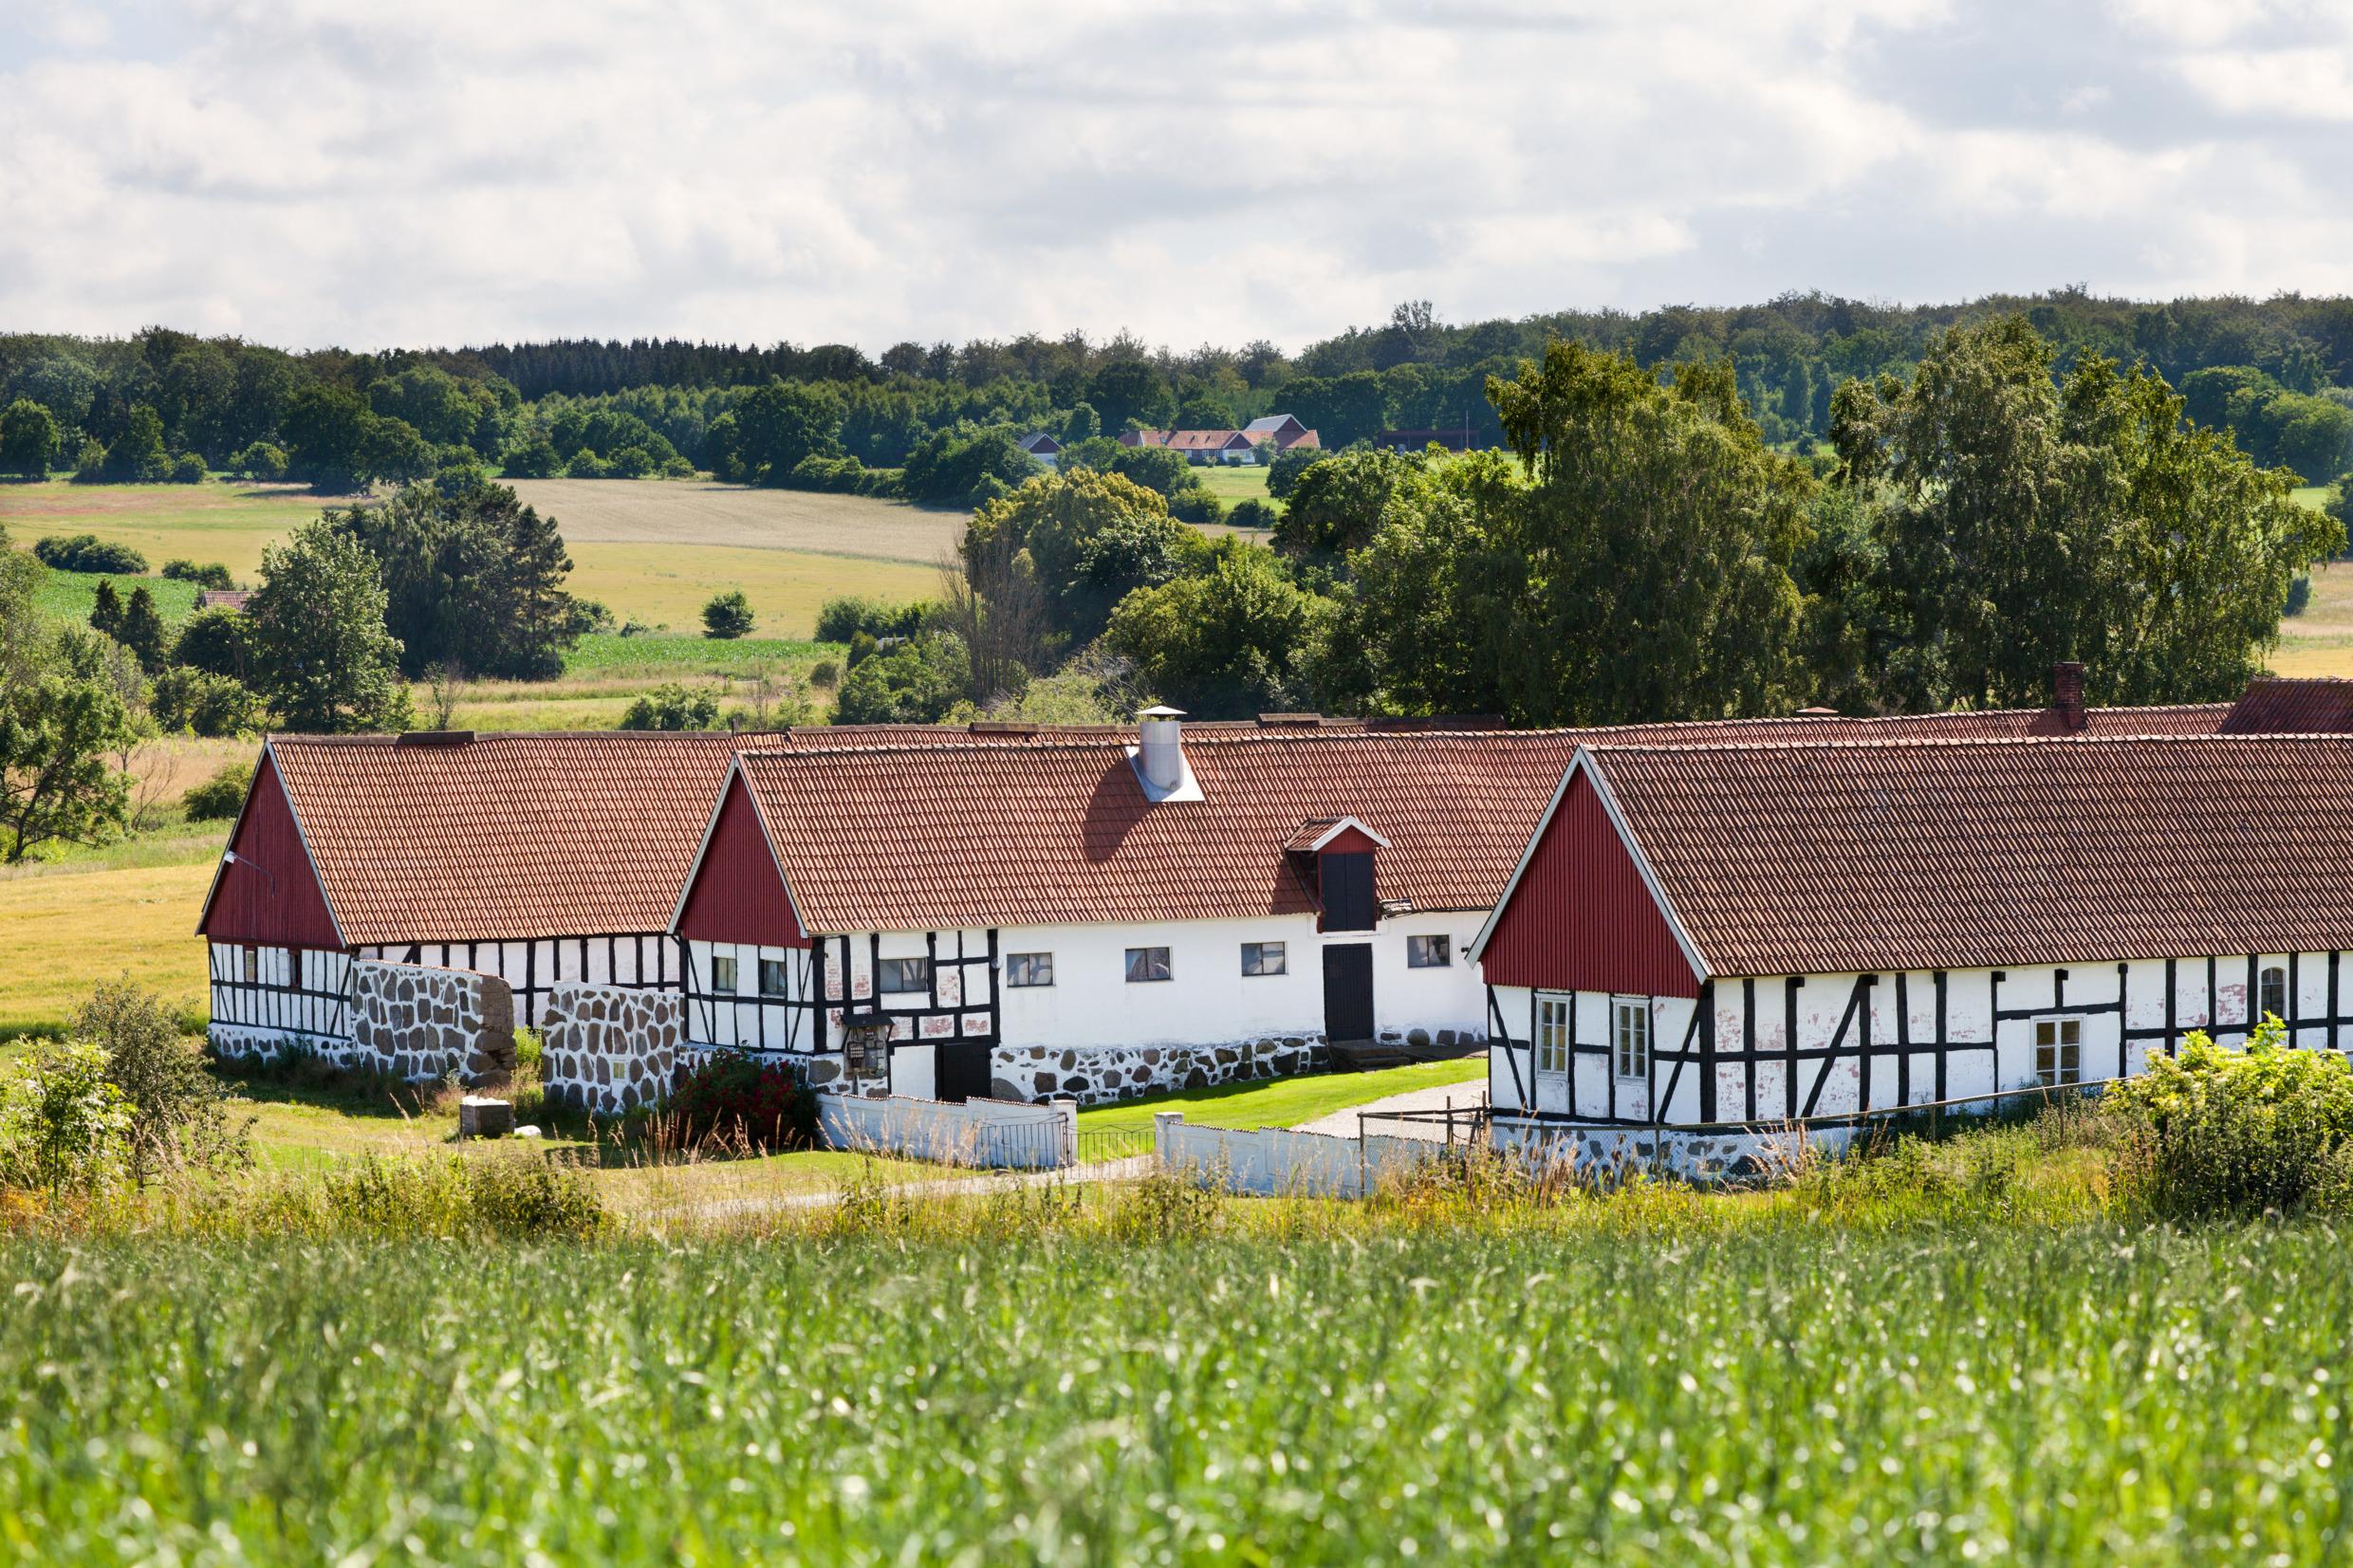 Three farm buildings on a field in Skåne are surrounded by crops and patches of trees.